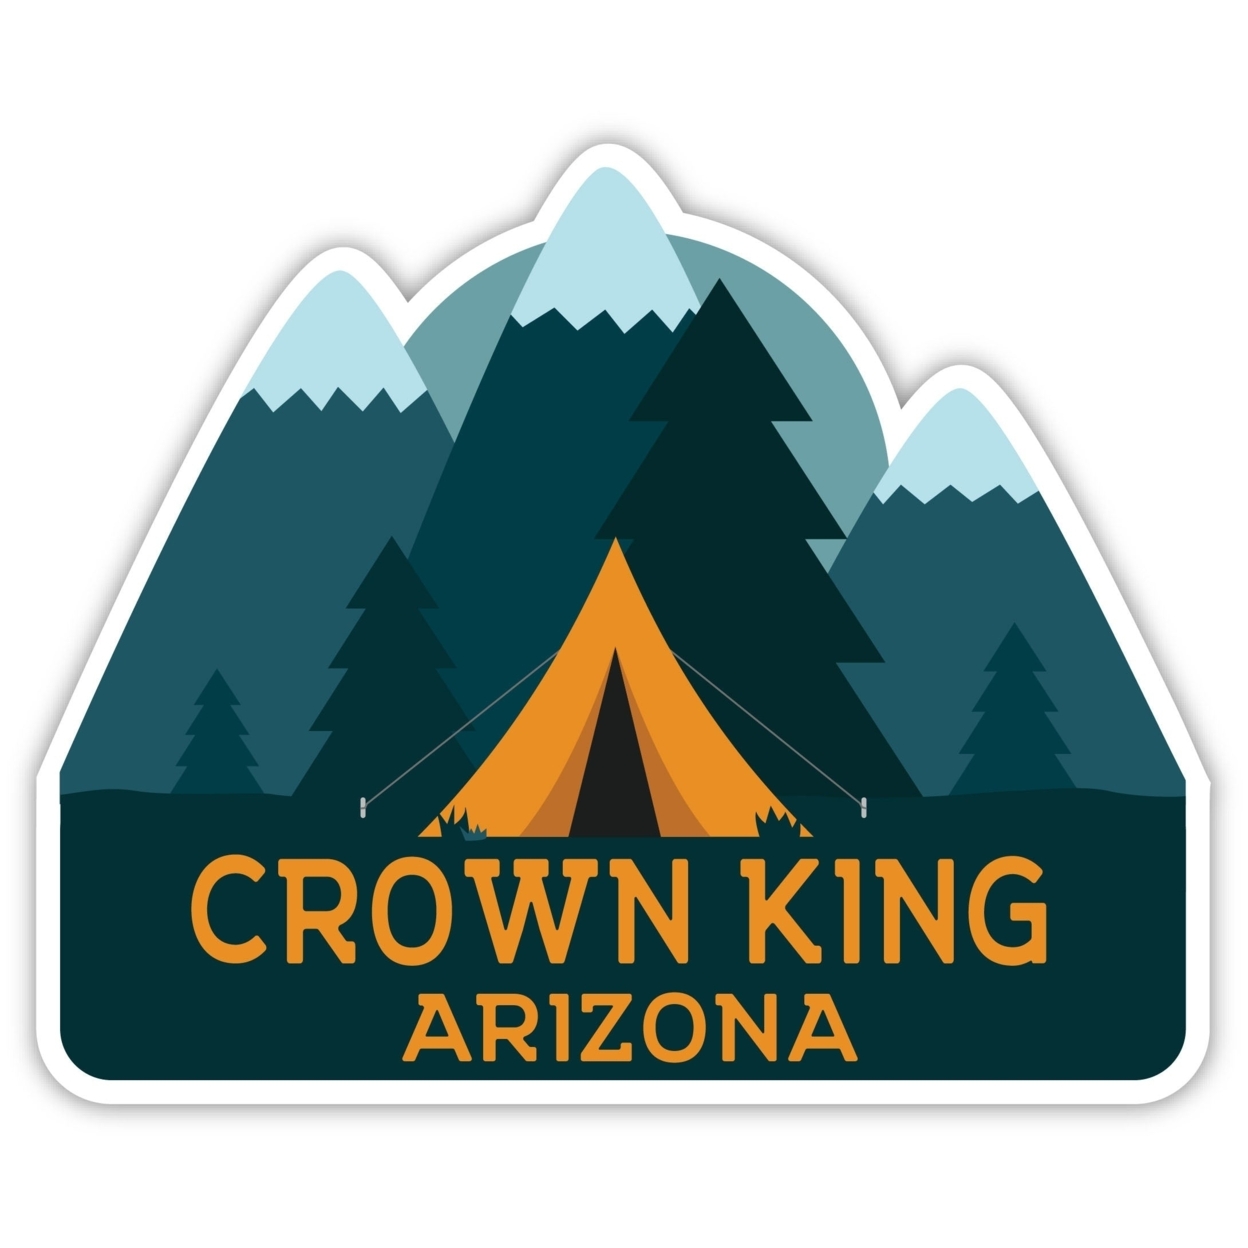 Crown King Arizona Souvenir Decorative Stickers (Choose Theme And Size) - 4-Pack, 8-Inch, Tent